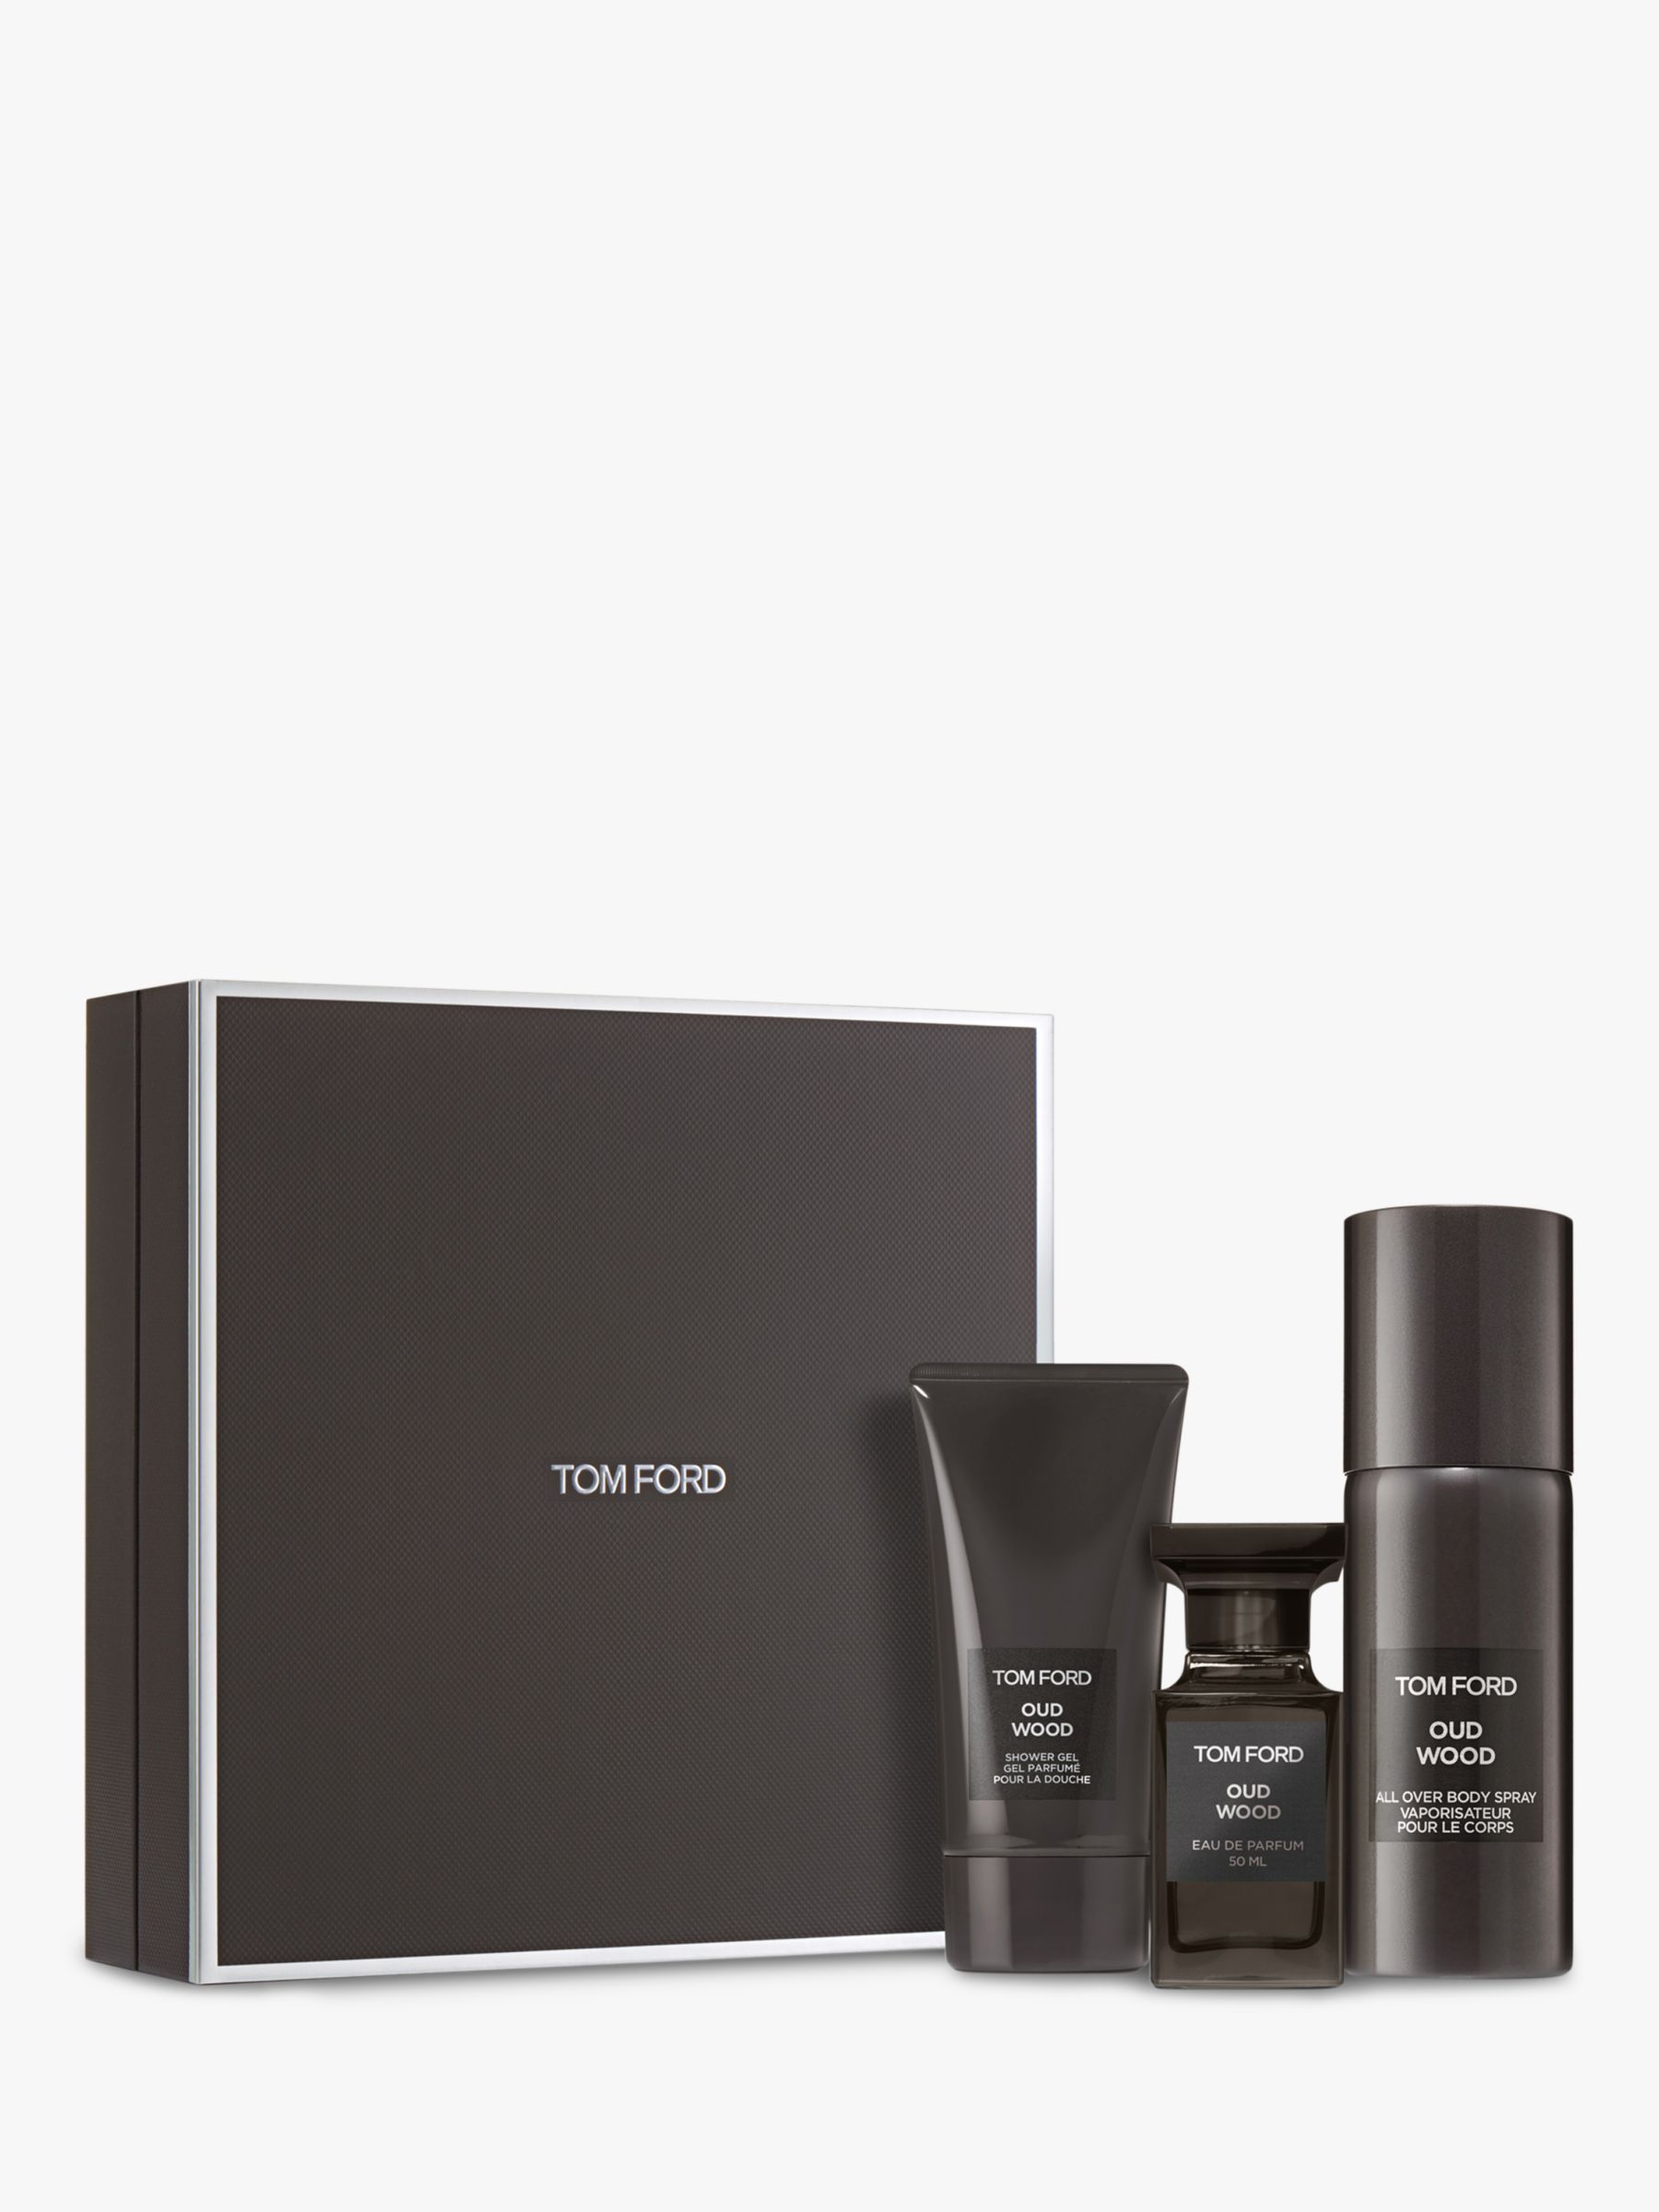 TOM FORD Oud Wood 3 Piece Fragrance Gift Set